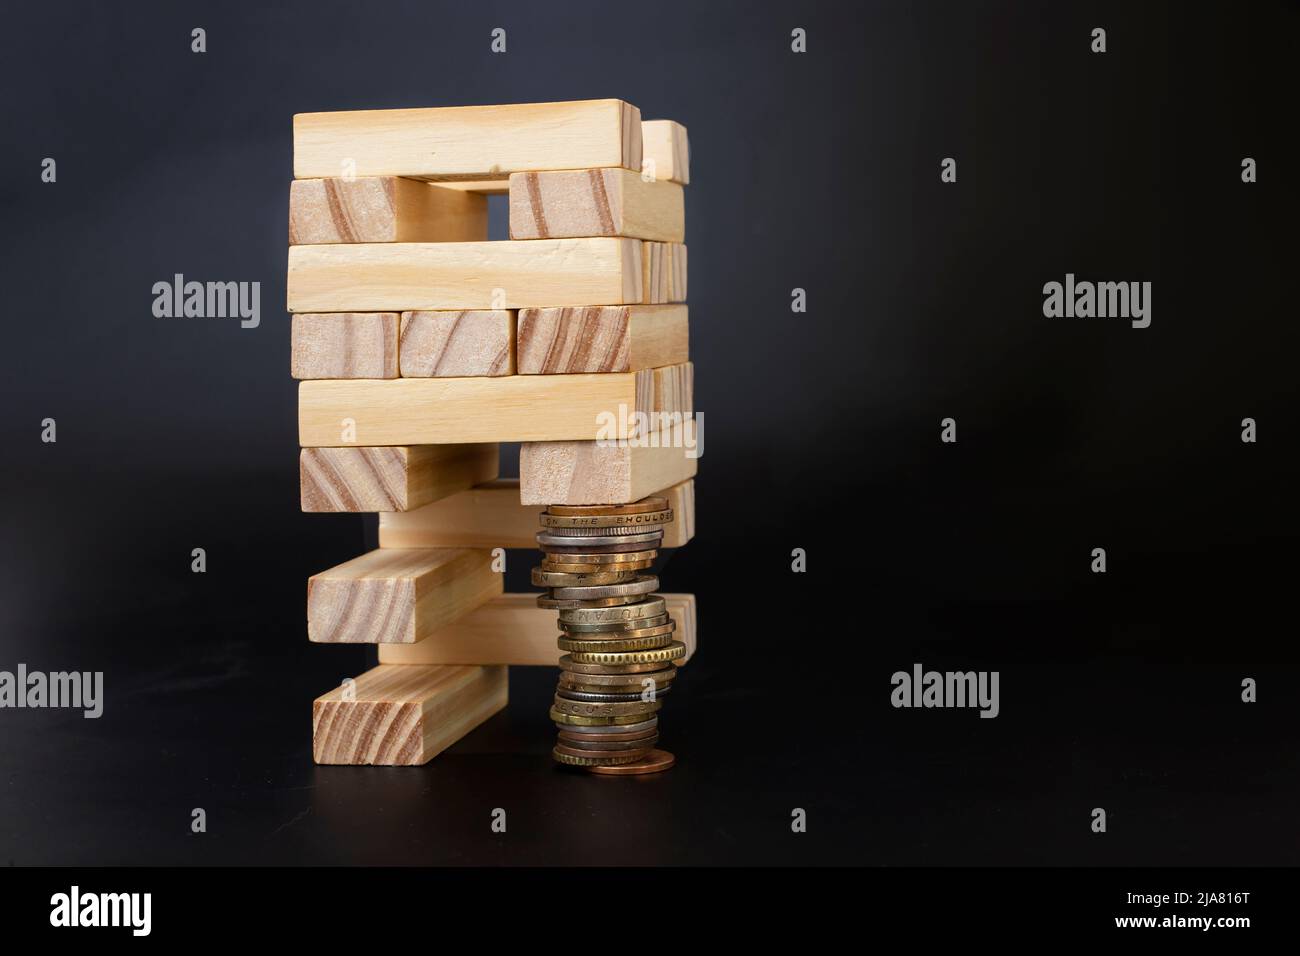 wood blocks structure supported by a stack of coins. Construction game metaphor isolated on black  background. Stock Photo